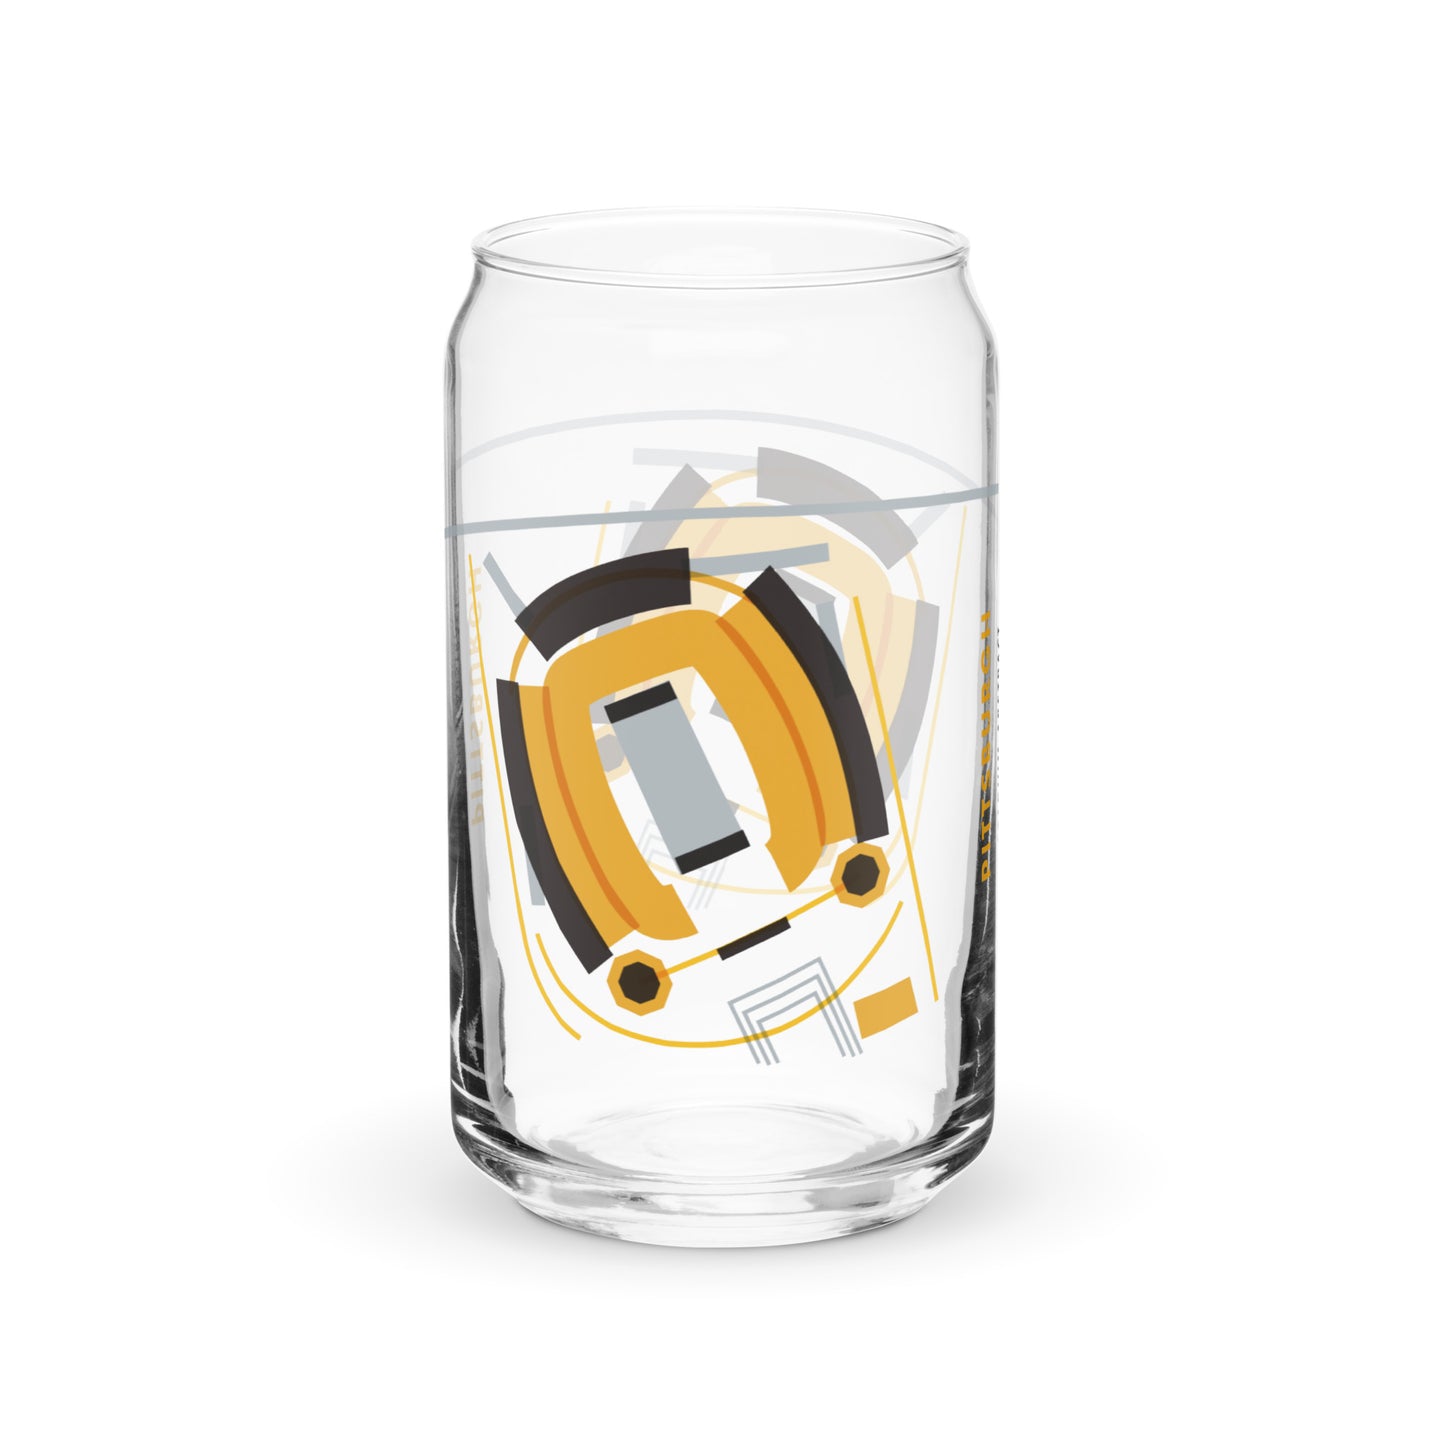 Pittsburgh Steelers | Can-shaped glass